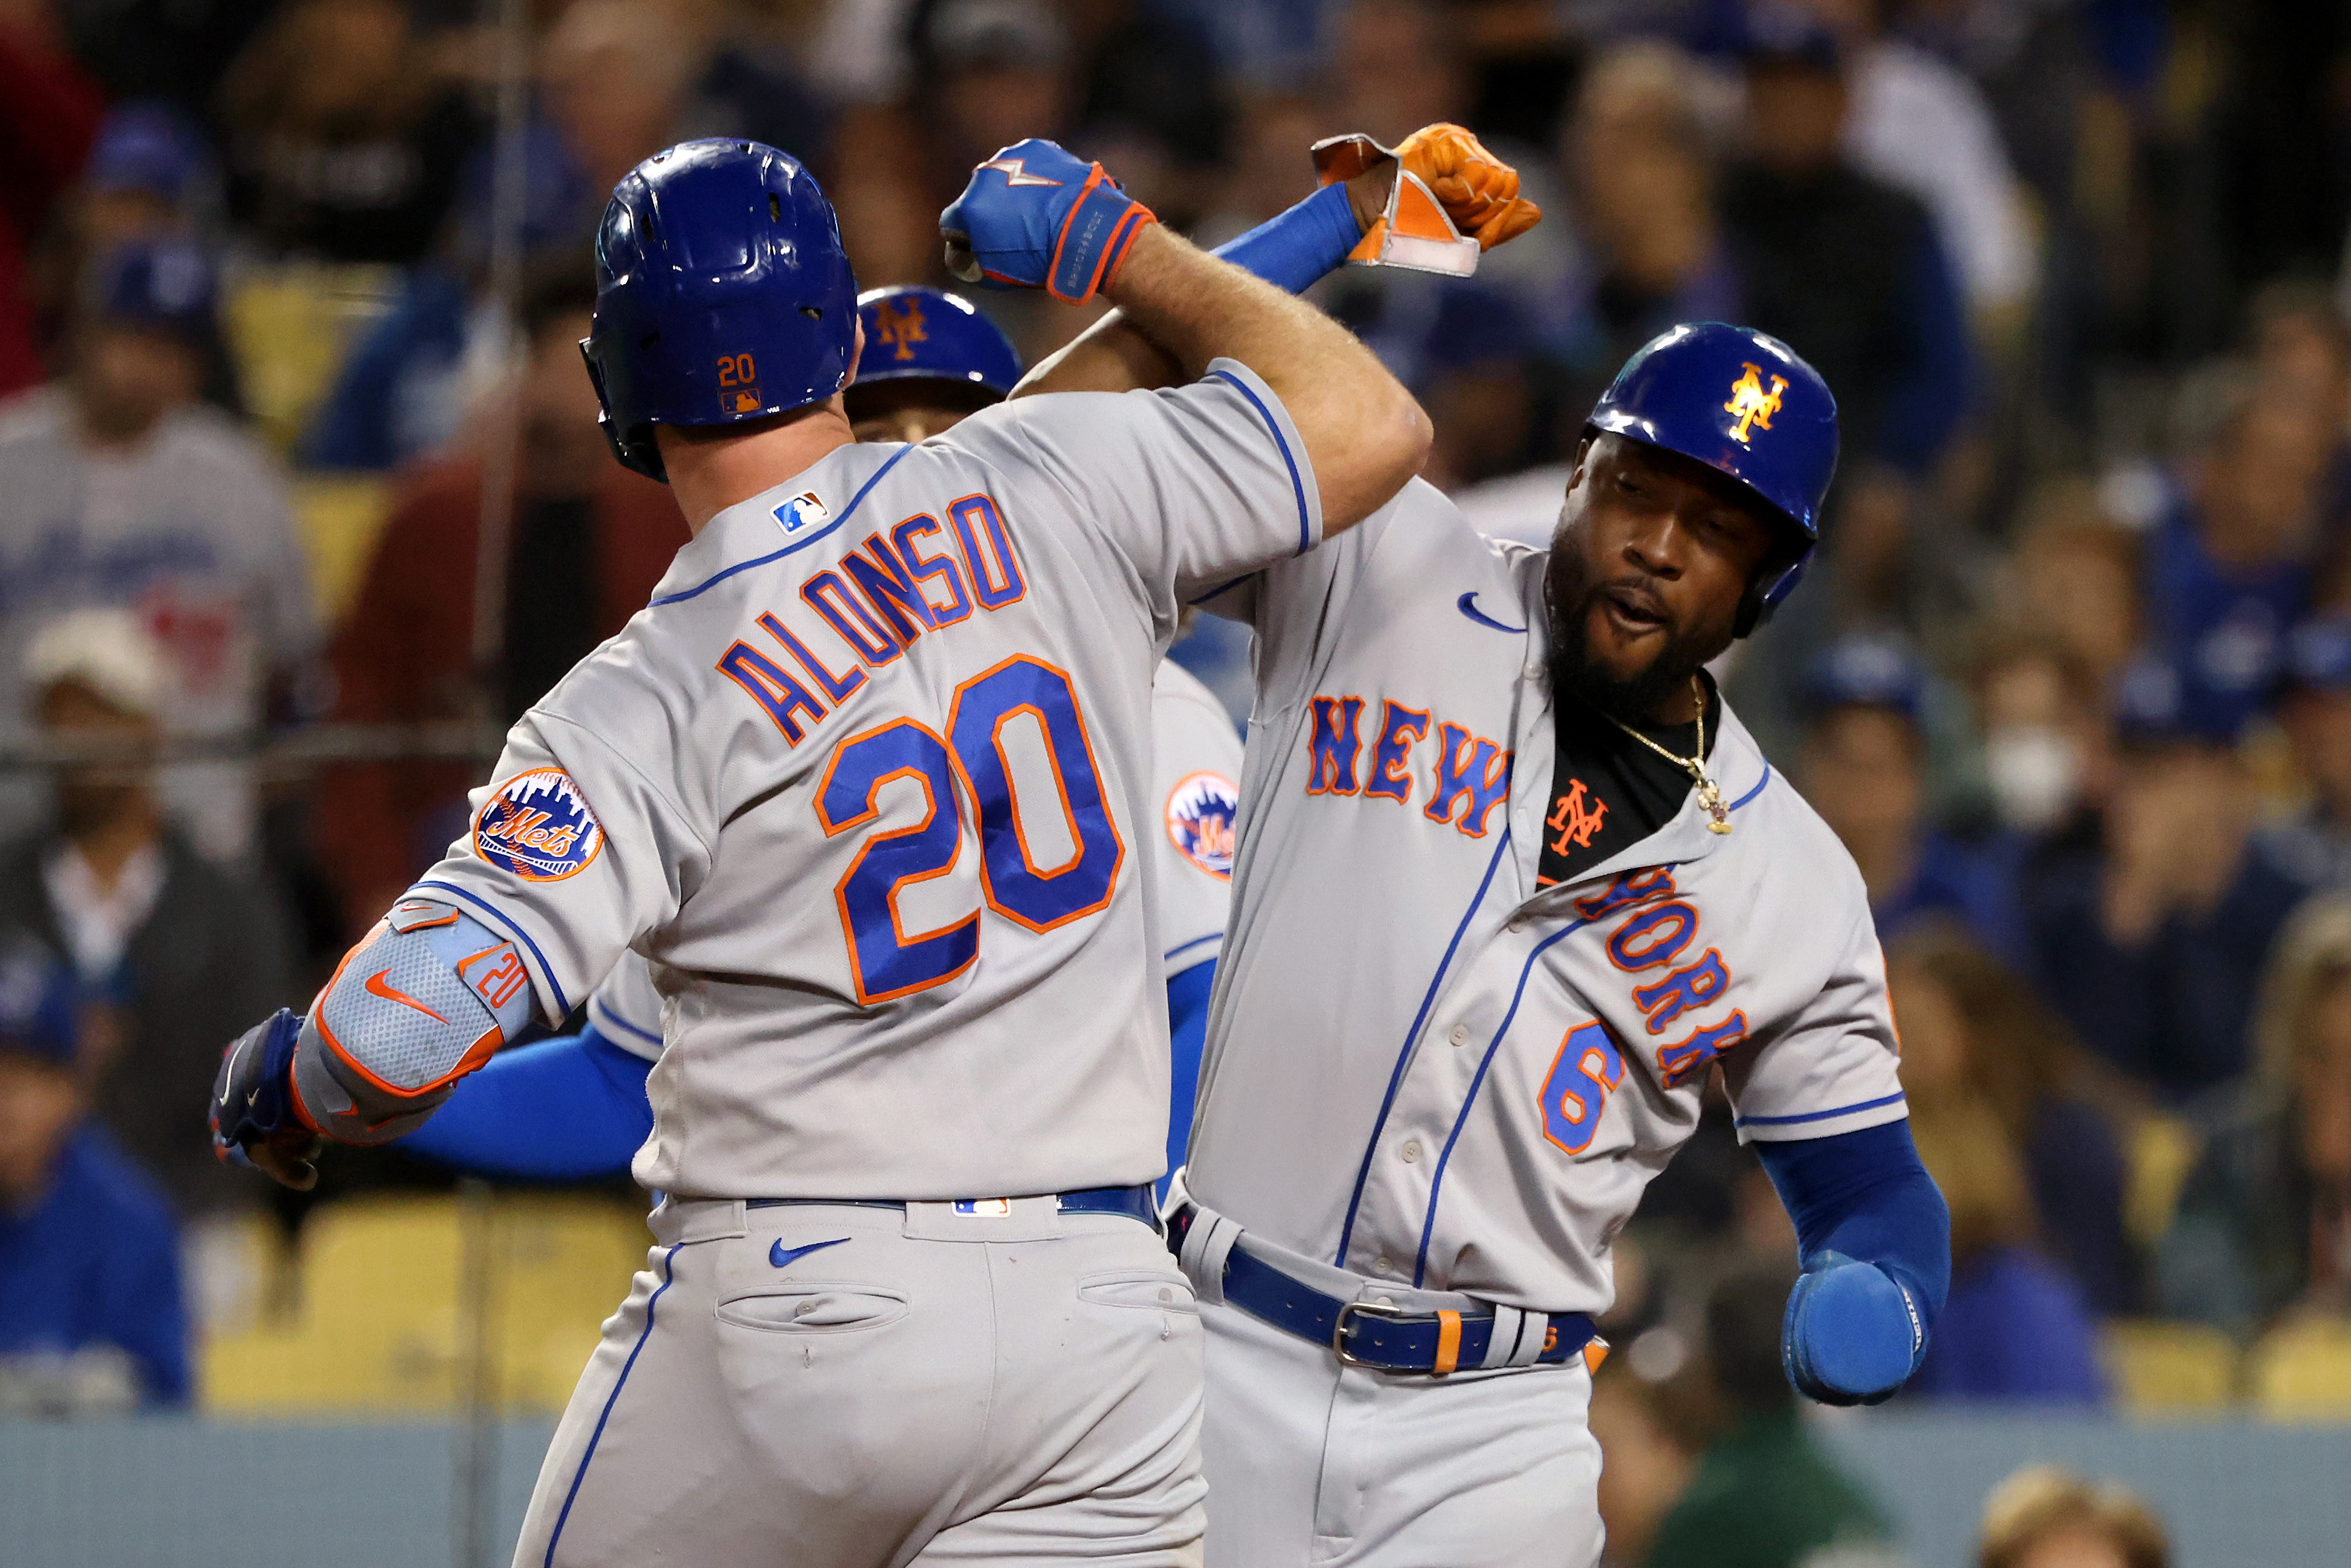 Pete Alonso Homers Twice, Mets Roll to 9-4 Victory Over Dodgers